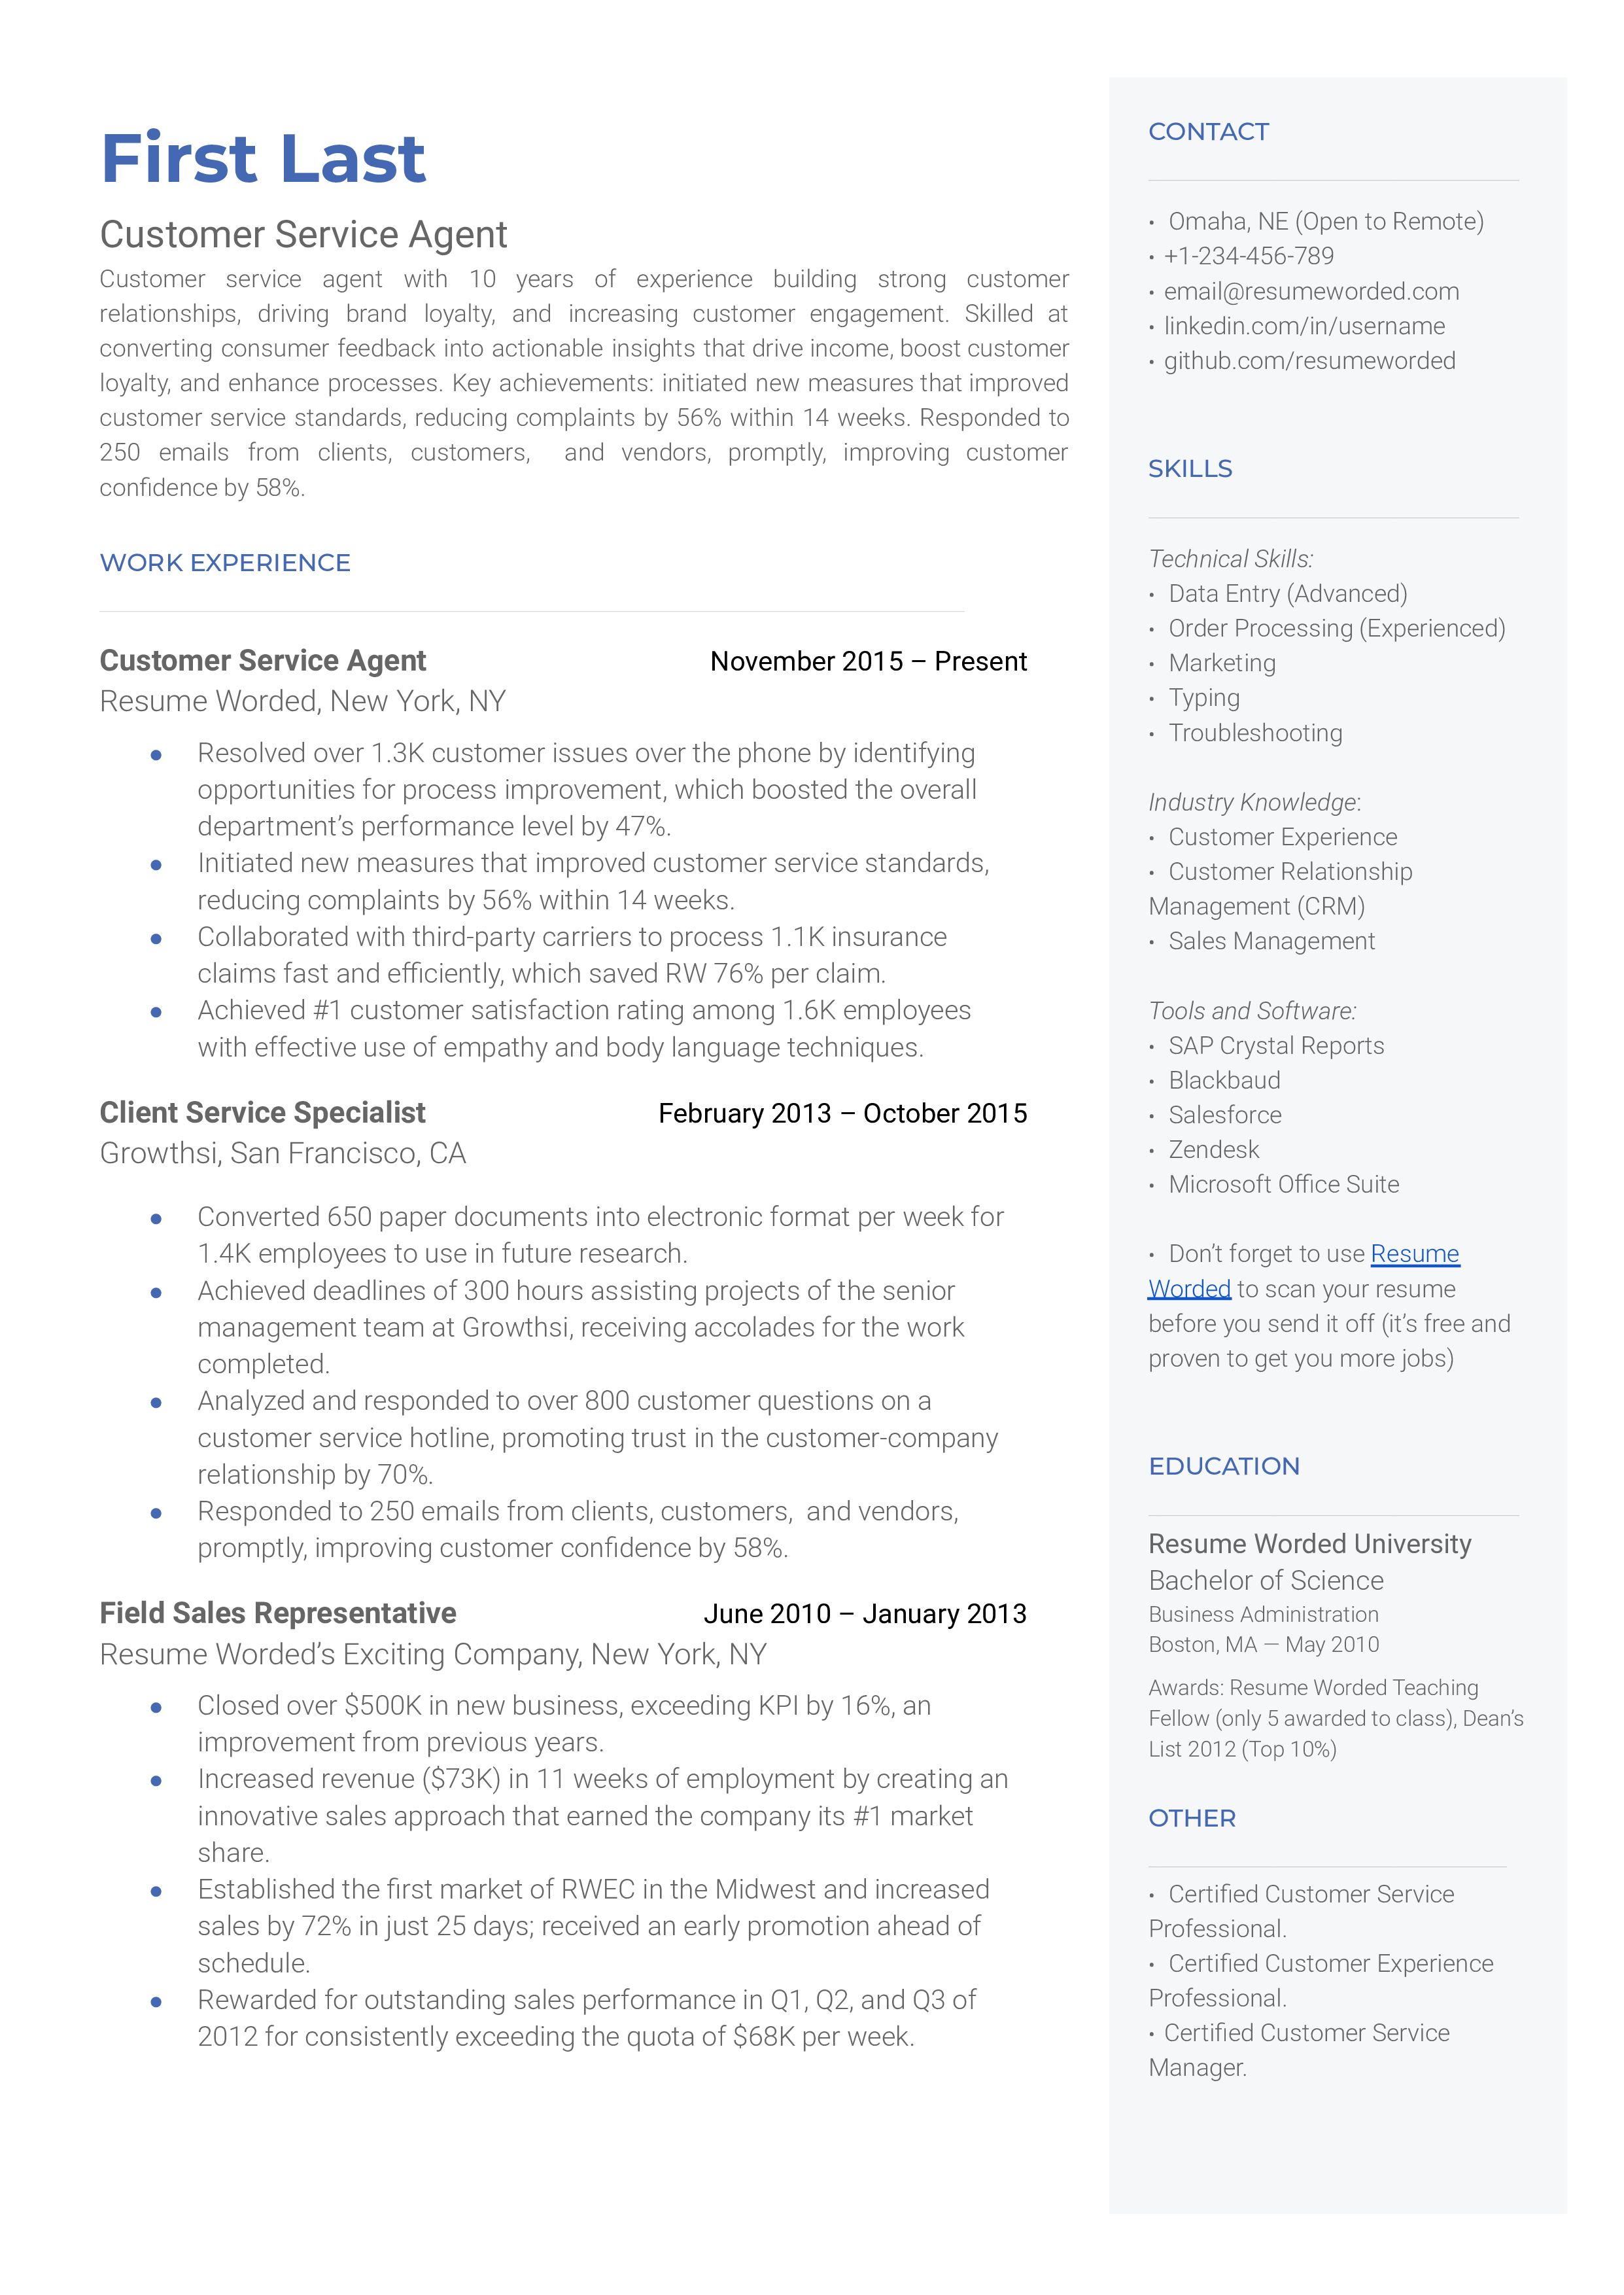 A CV crafted for a Customer Service Agent role, demonstrating problem-solving abilities and tech-savviness.